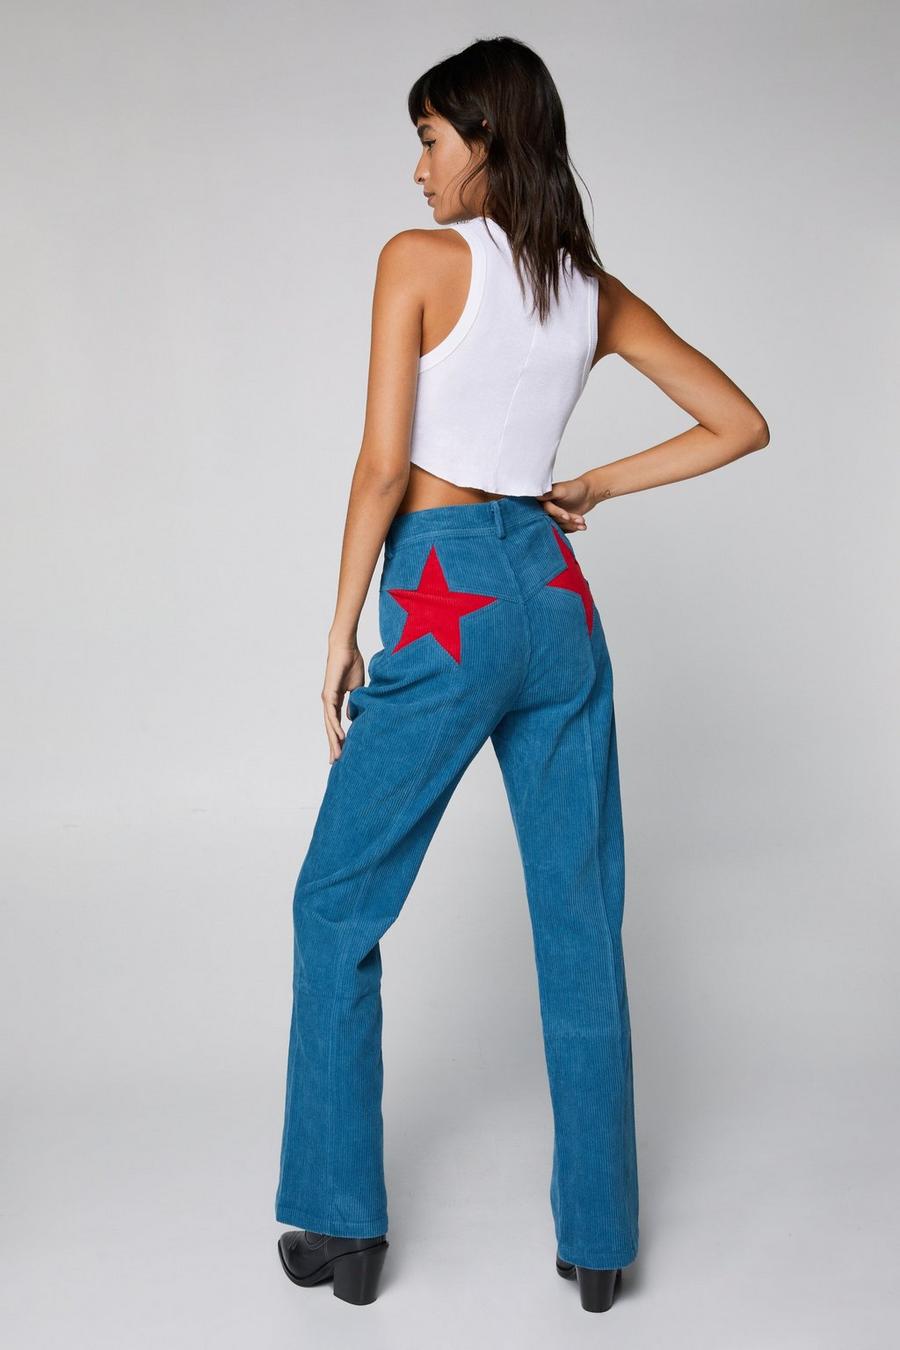 Free Shipping 2021 New Long Pants Women Flare Trousers 25-30 Size Denim  Female Long Stretch Jeans High Waist Pants Patchwork